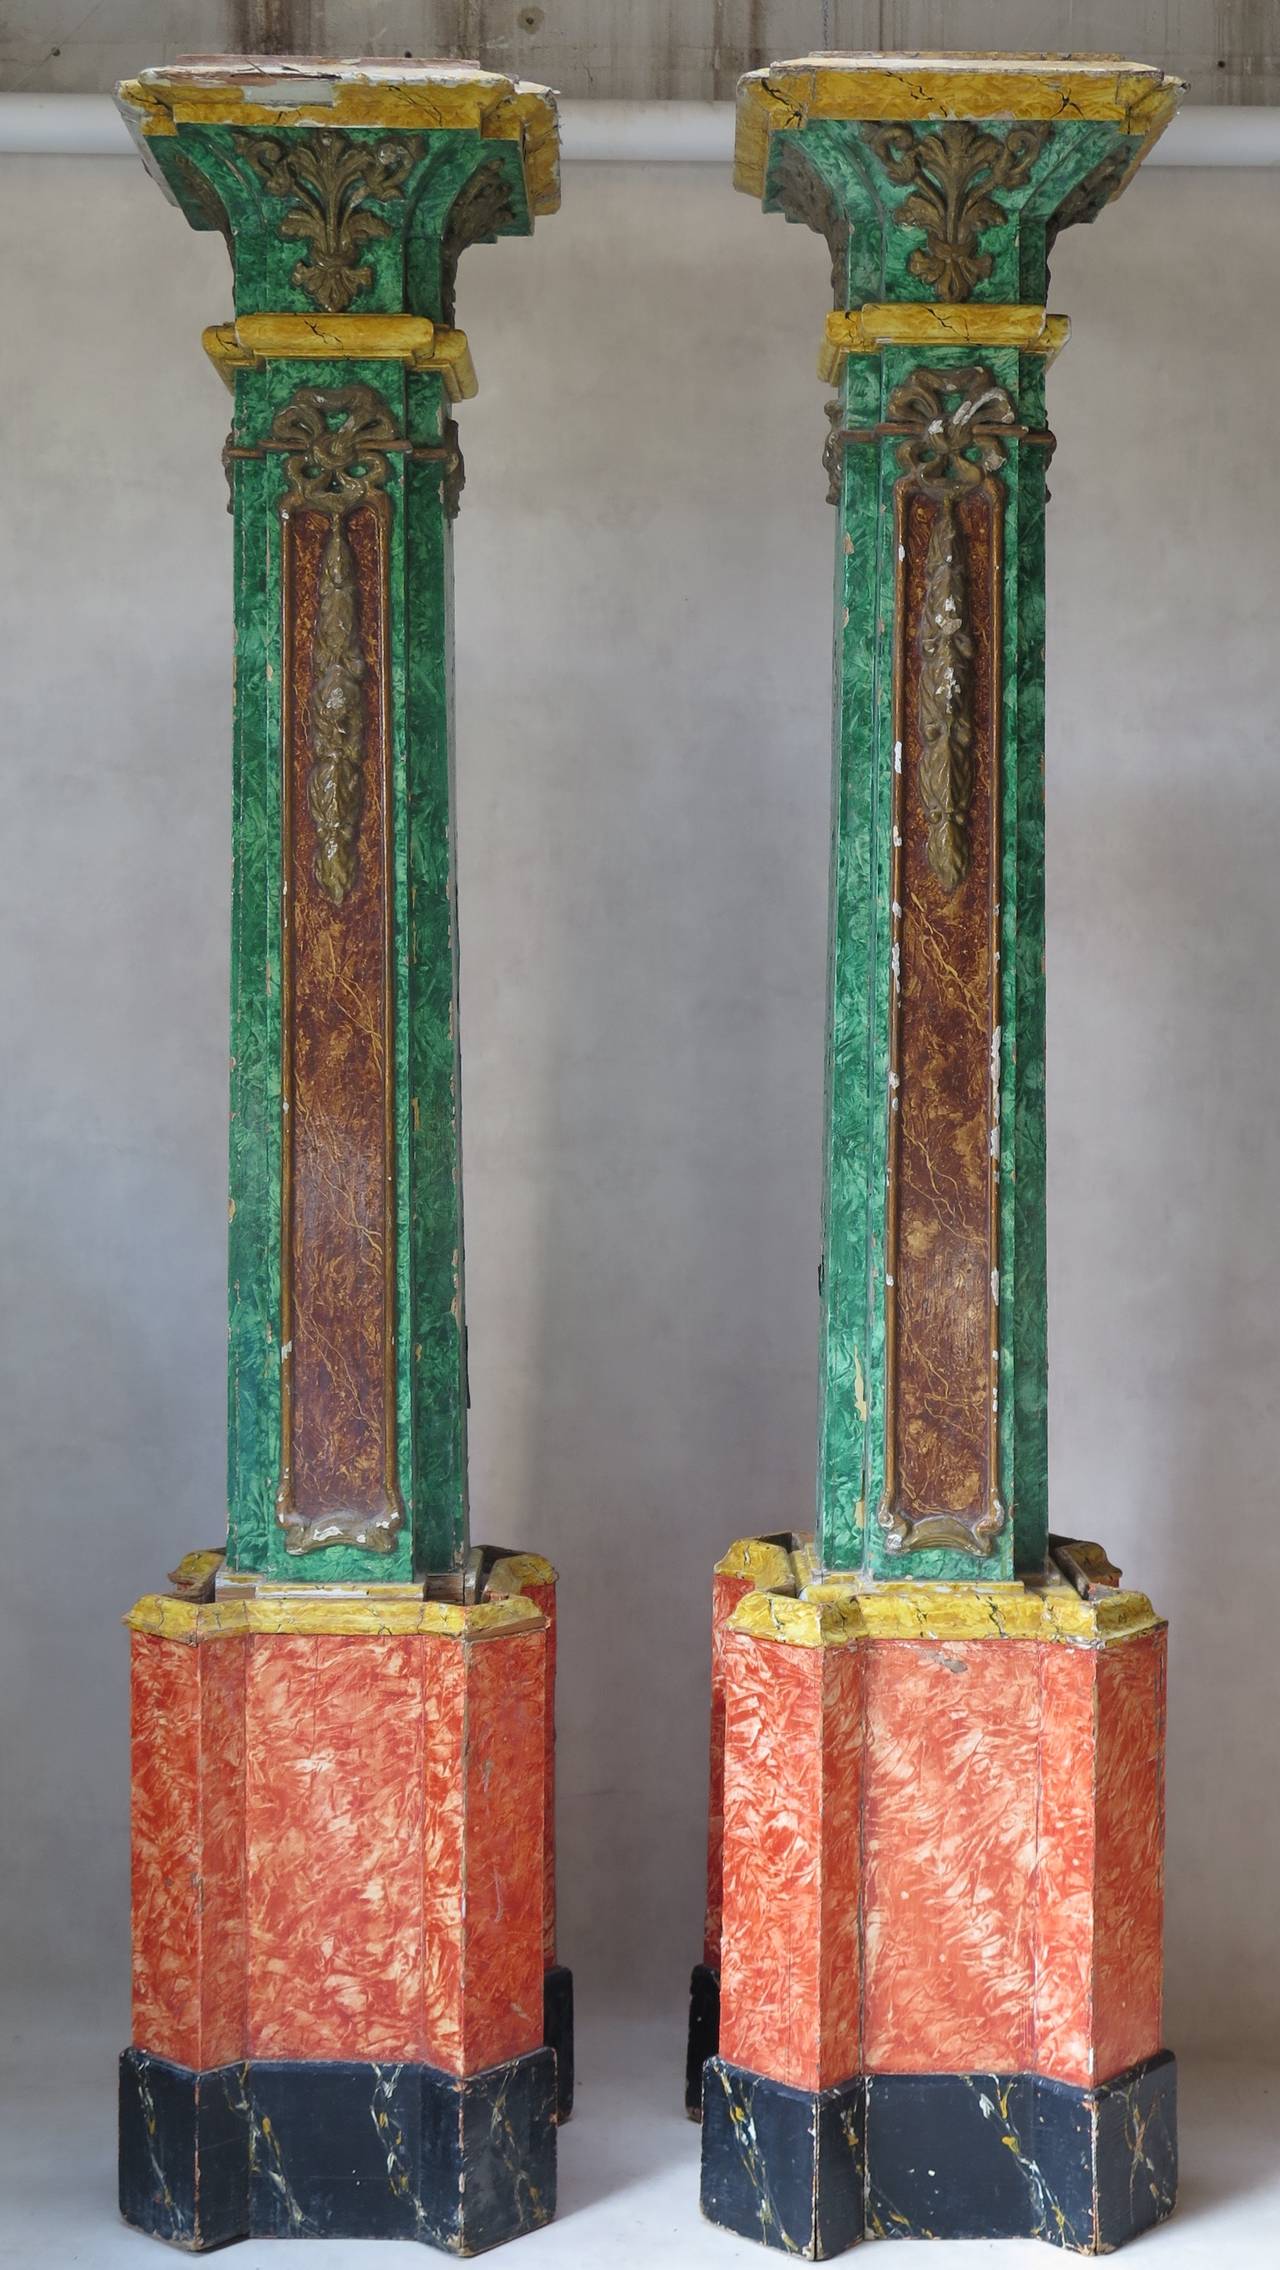 A very tall pair of decorative wood columns in two parts (bases and tops), painted in polychrome marble trompe l'oeil. The moldings on the tops parts (painted in antique gold) are in papier mâché.